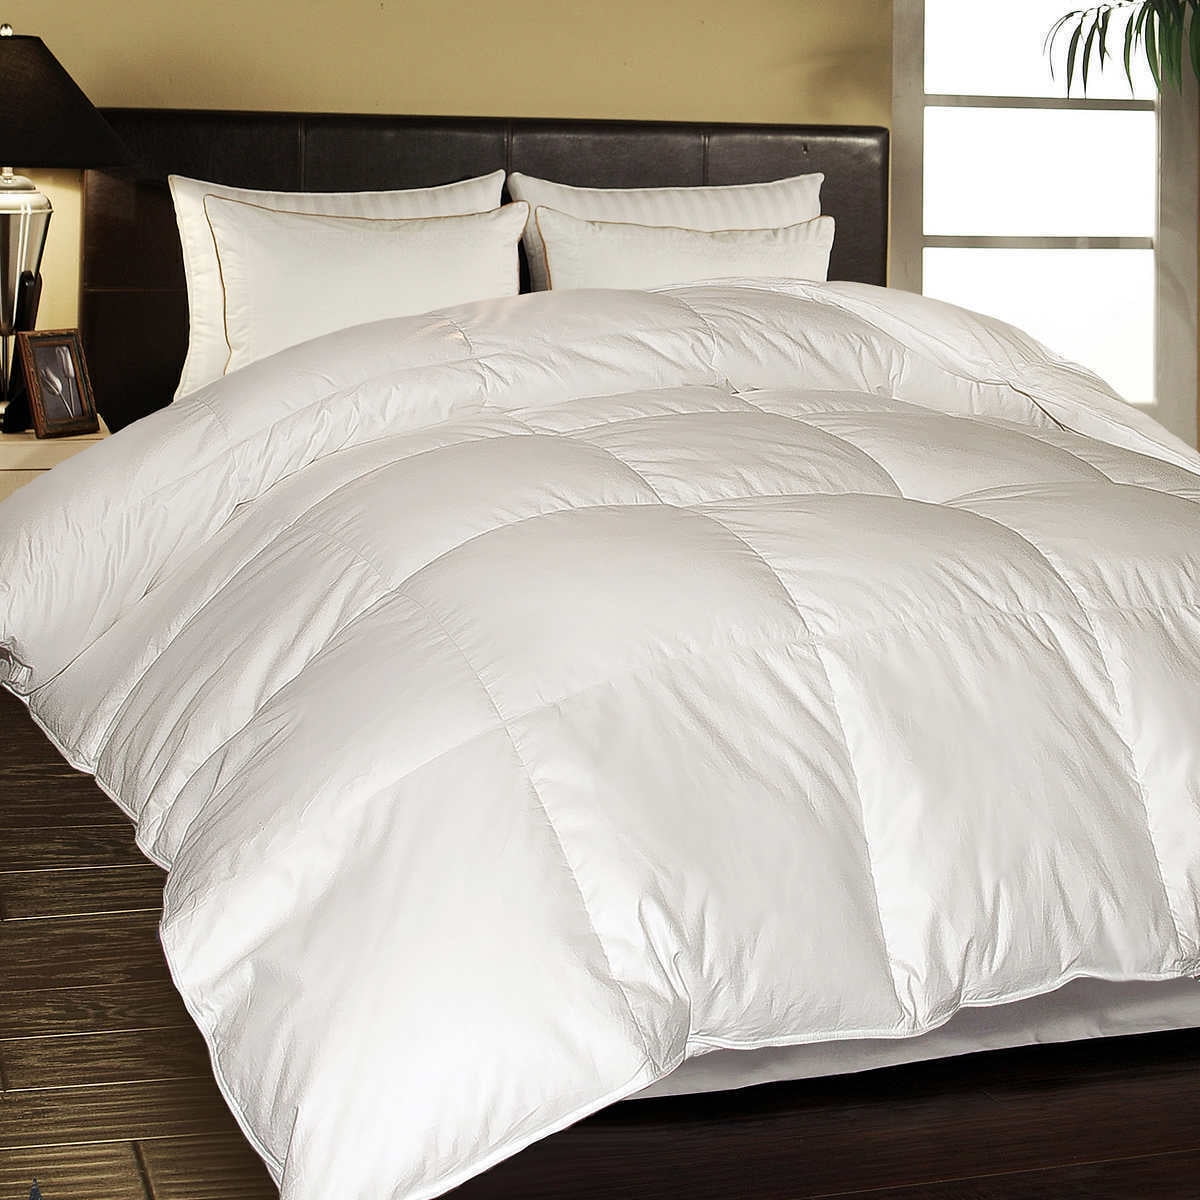 Hotel Collection Full/queen White Down Comforter 400 TC Medium Weight J0y269 for sale online 